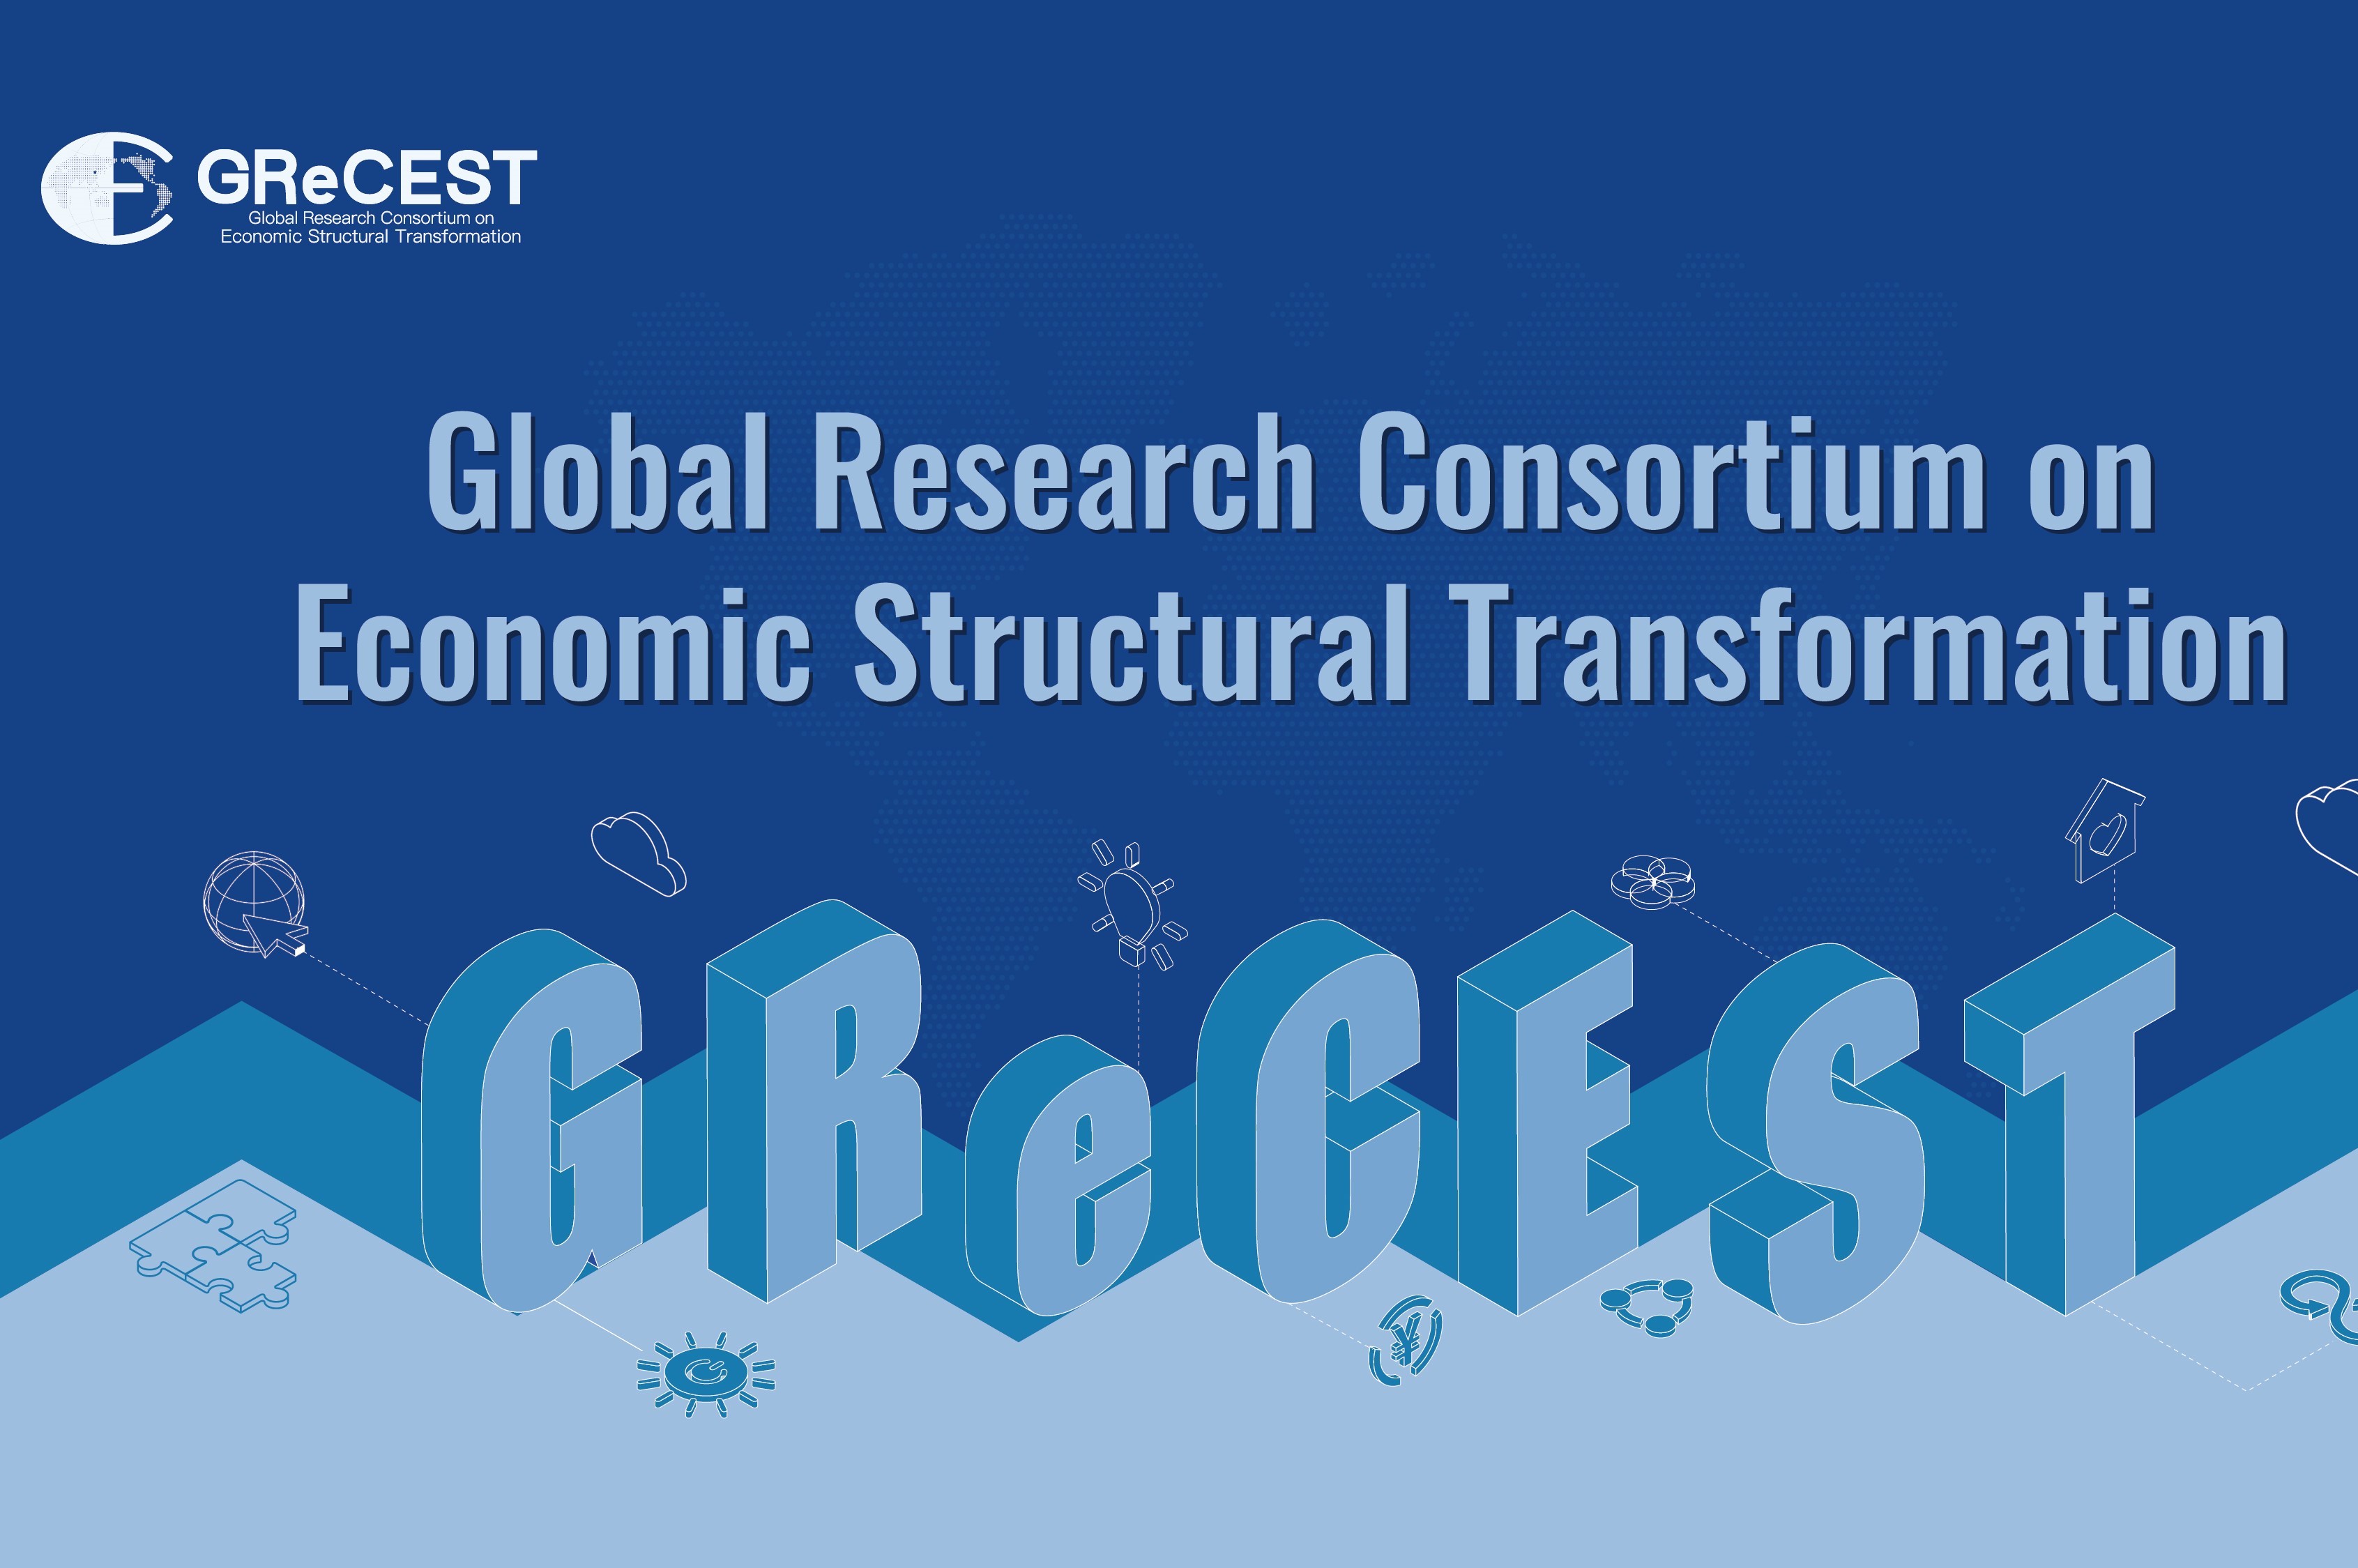 【Register Now】Agenda for 2022 Annual Conference of the GReCEST